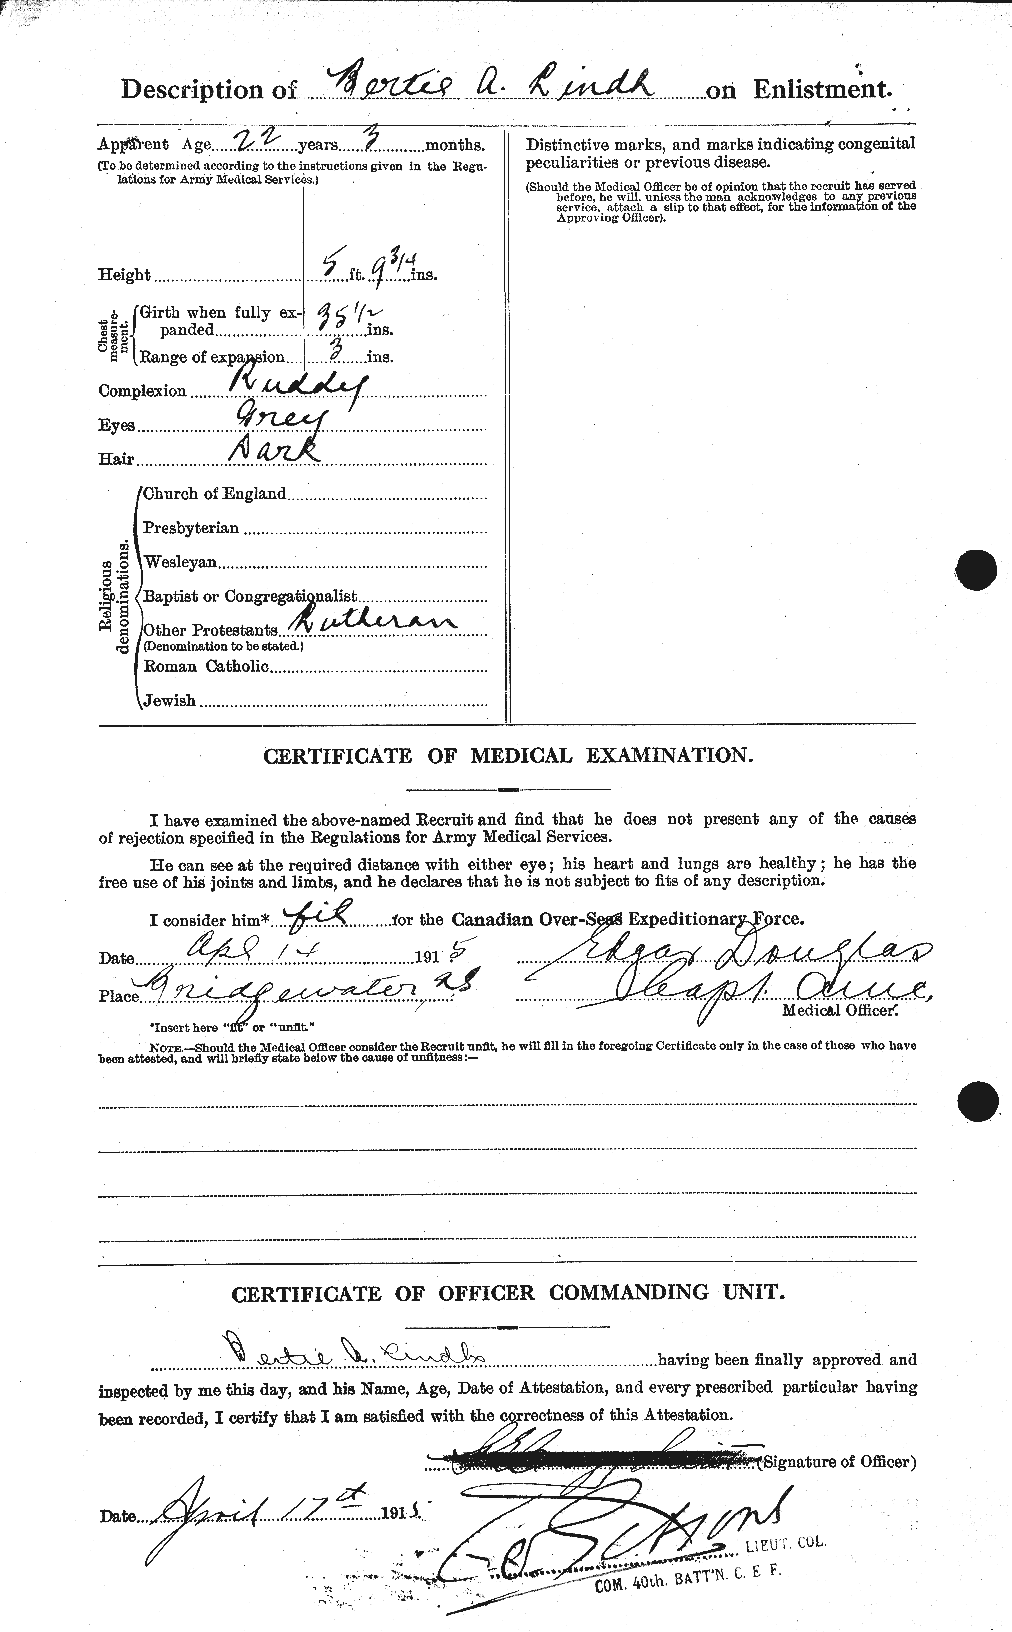 Personnel Records of the First World War - CEF 467753b